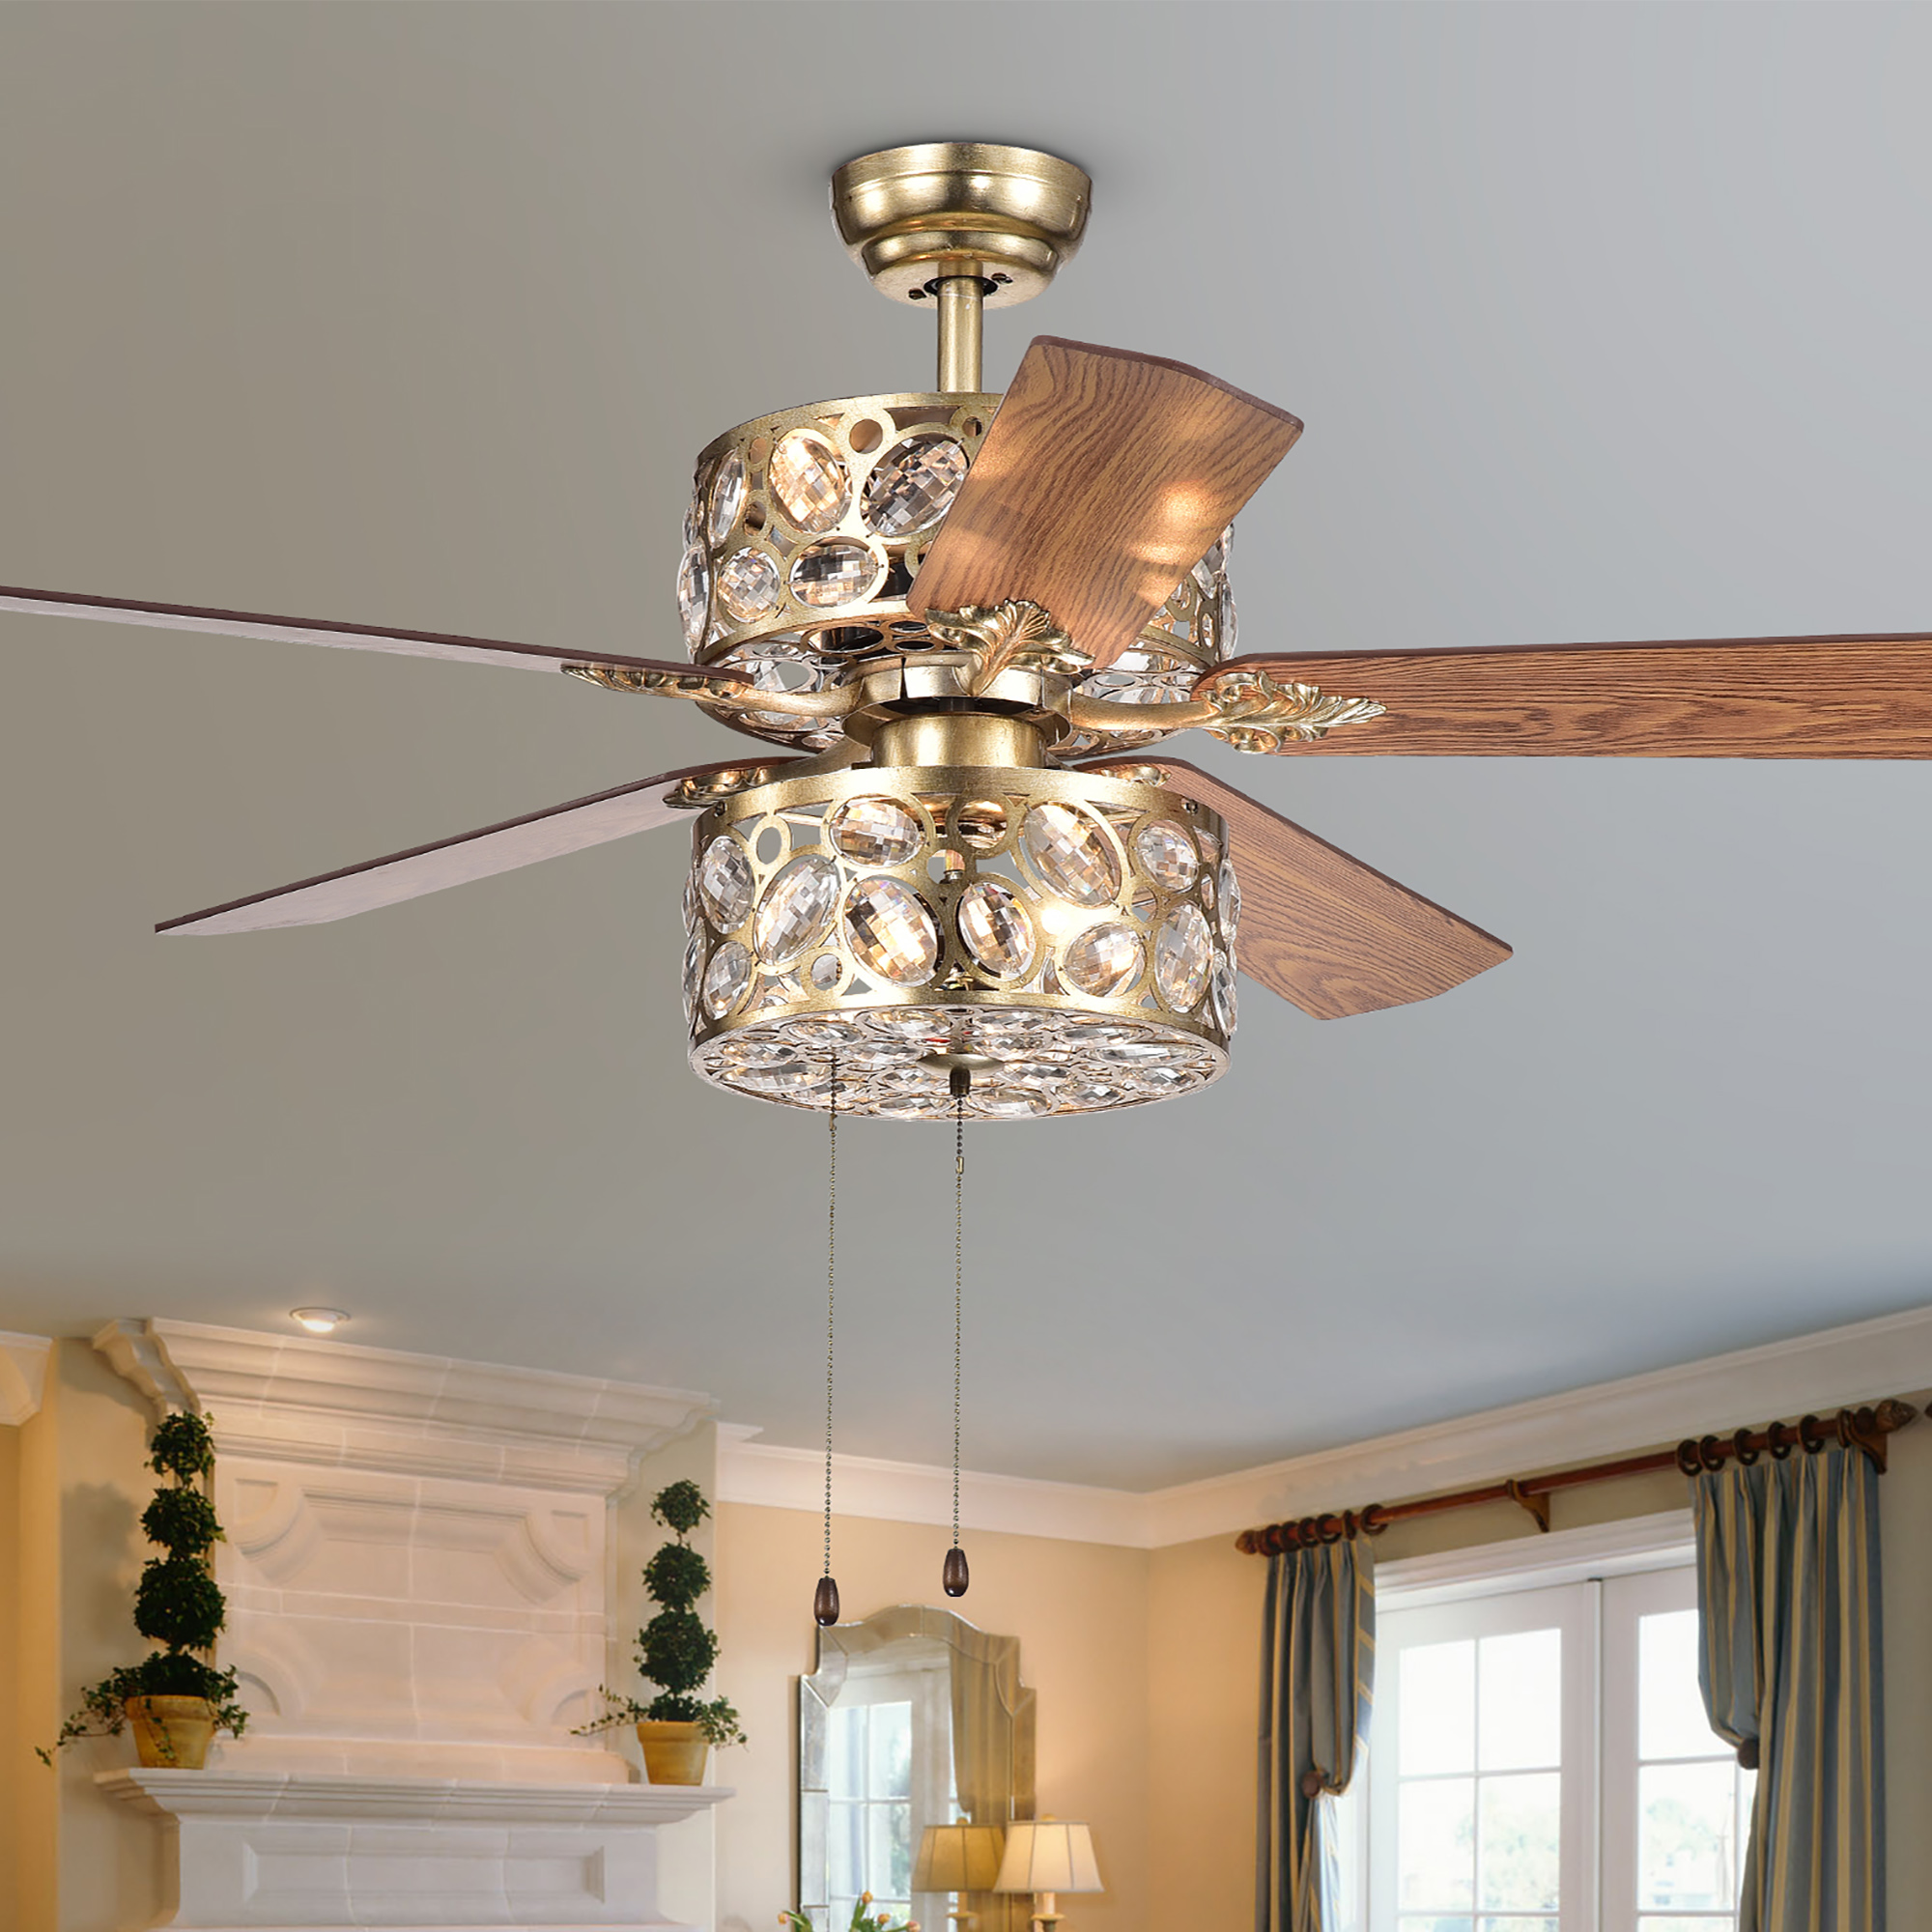 Thisavro 5-Blade Ceiling Fan 52-Inch Antique Brass and Crystal